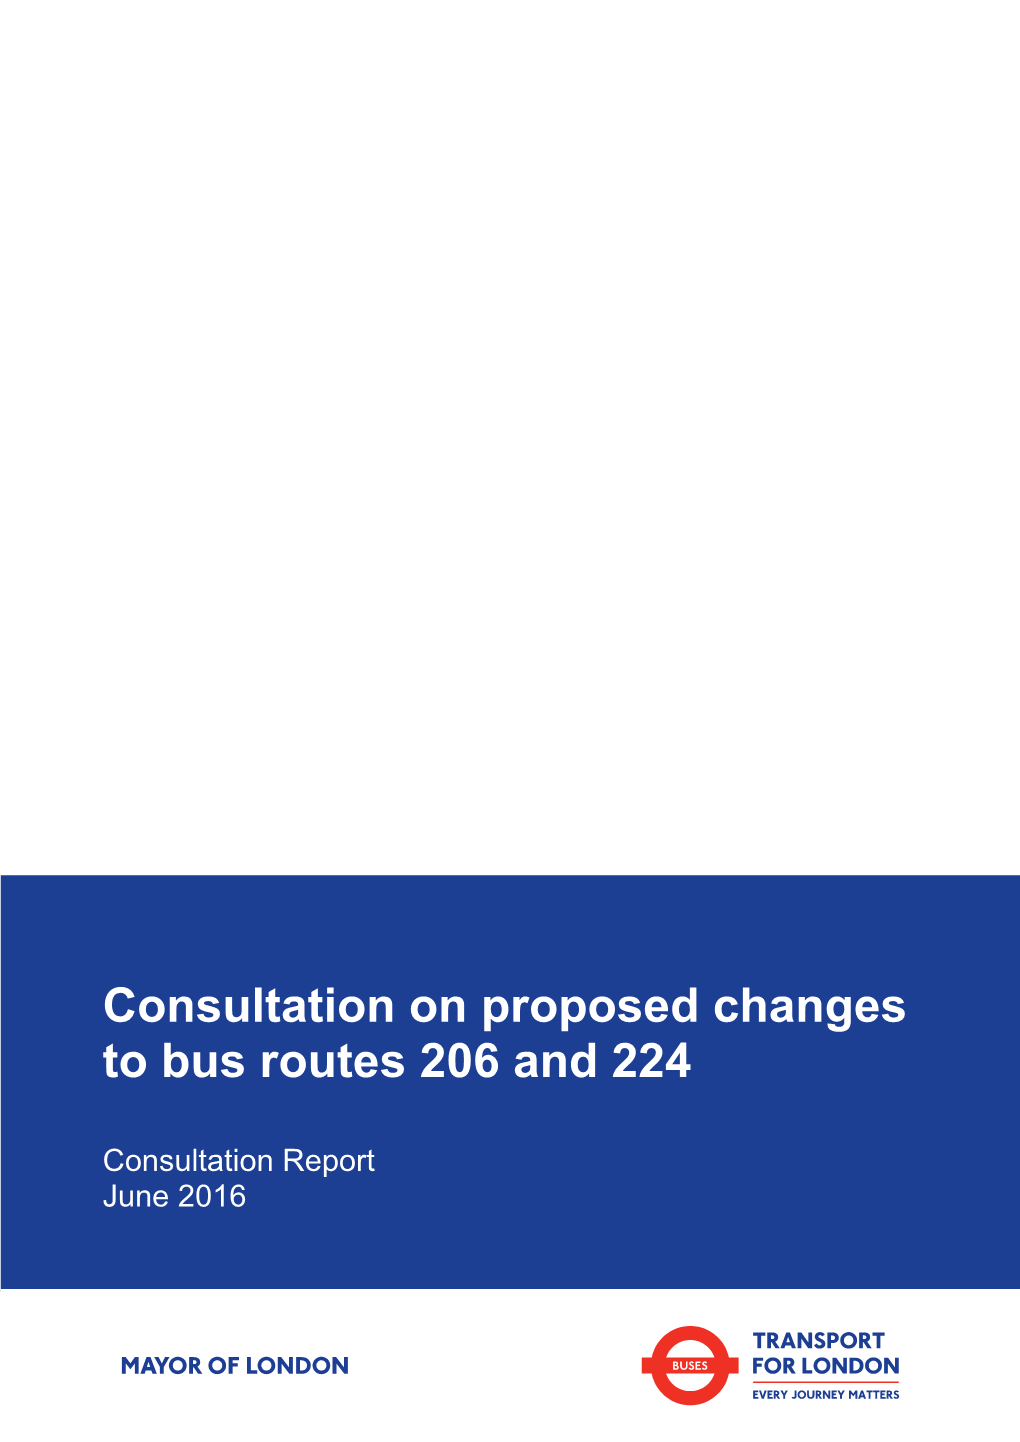 Consultation on Proposed Changes to Bus Routes 206 and 224